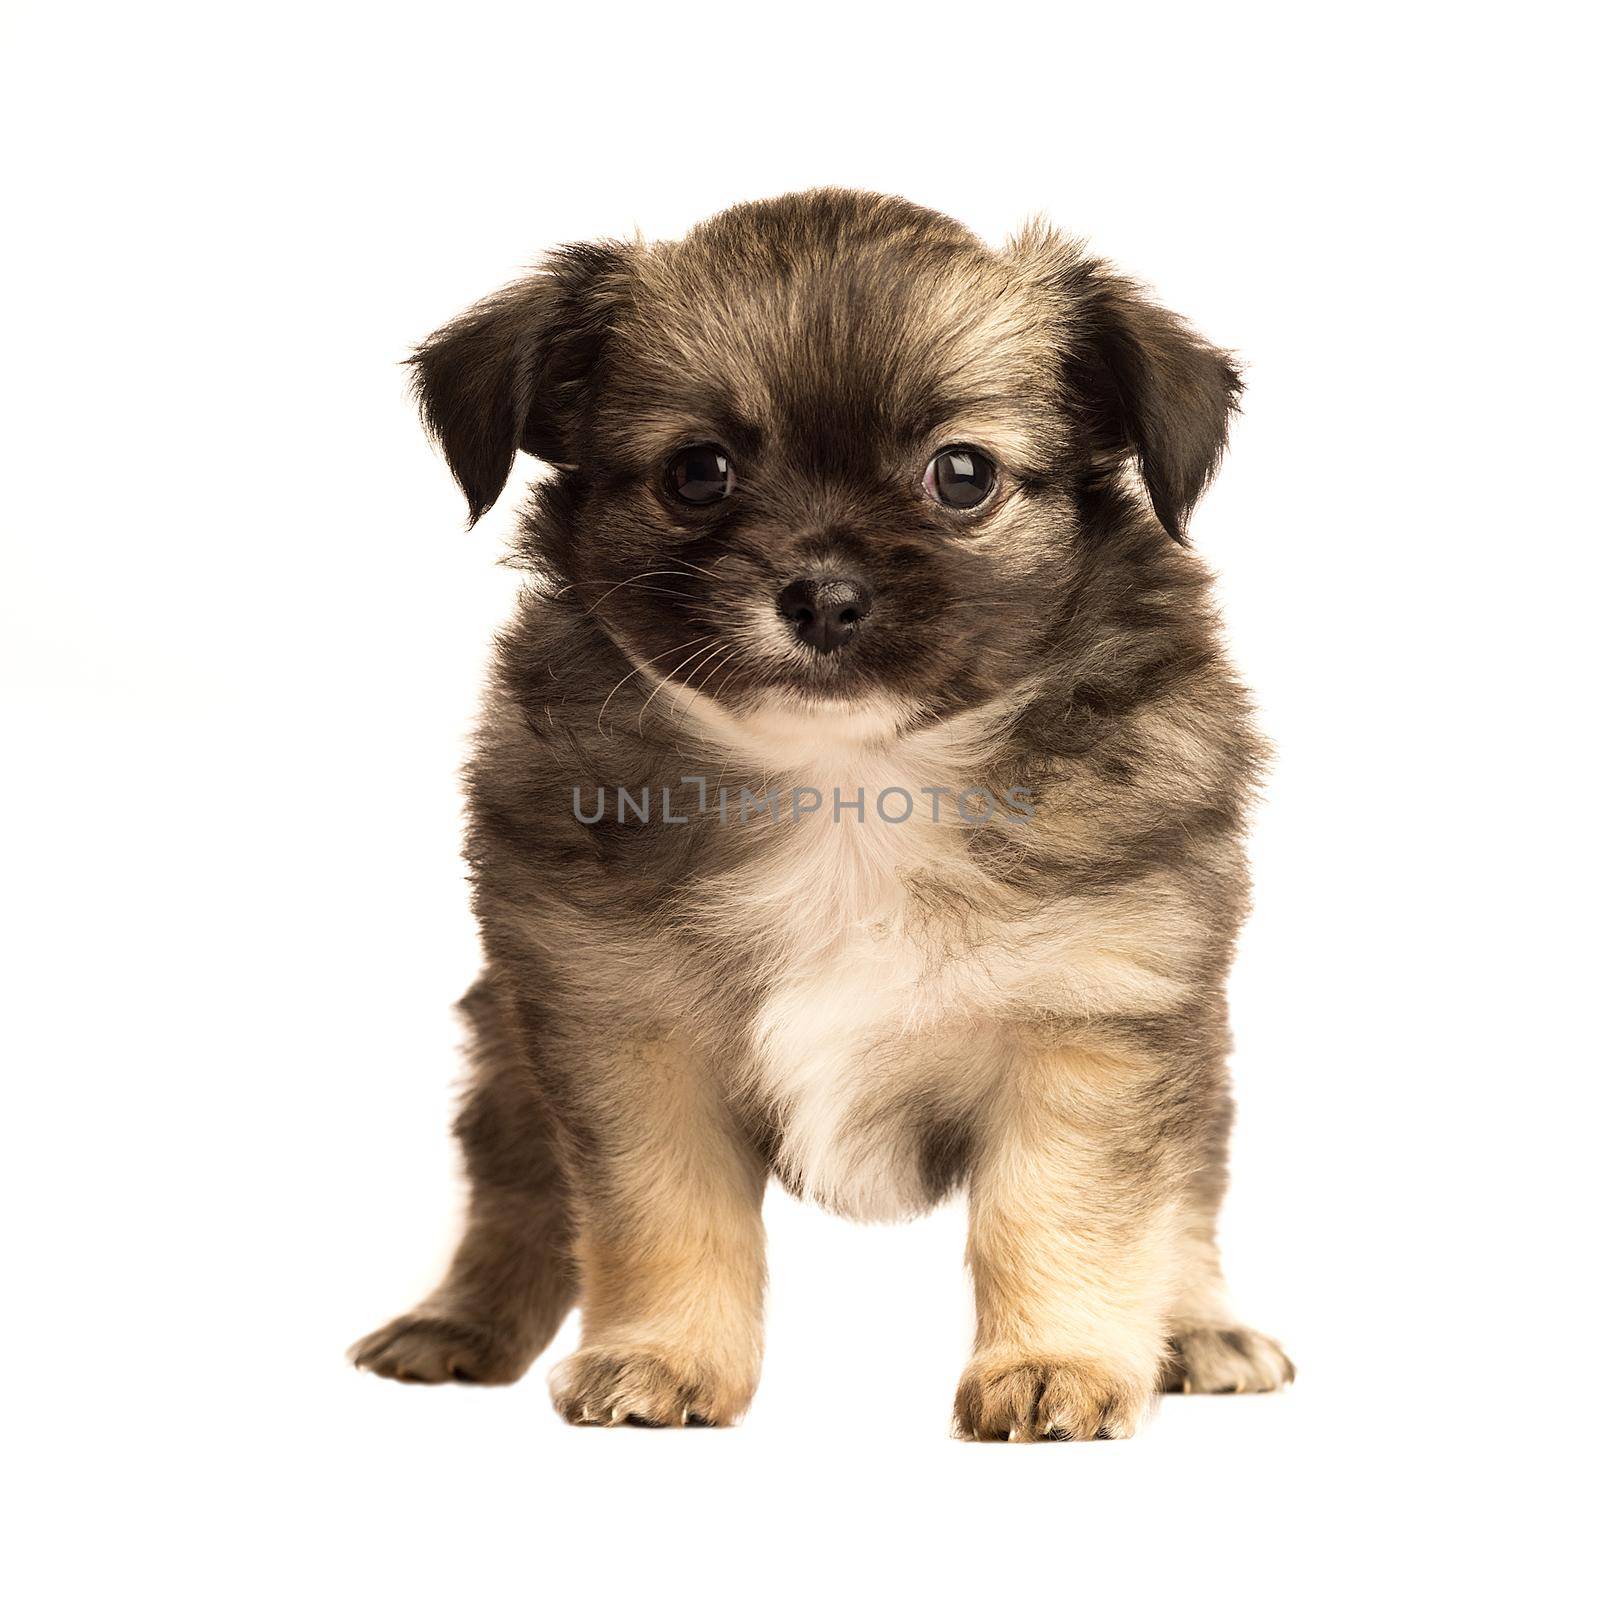 Cute little chihuahua puppy isolated in white background front view by LeoniekvanderVliet